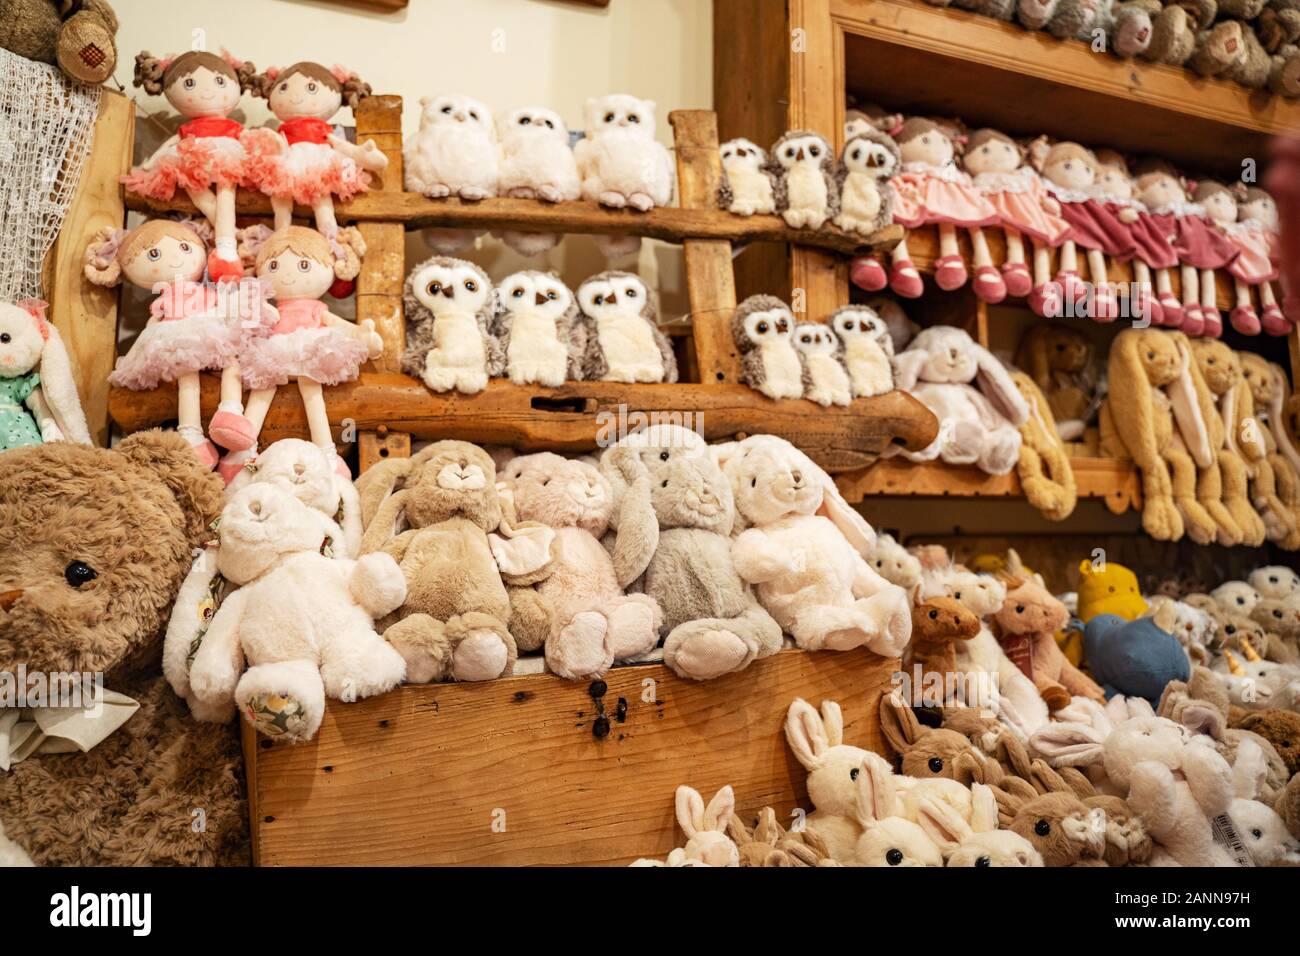 Lots of cute fluffy brown and beige teddy bears on a store counter and shelves. Toys background. Stock Photo